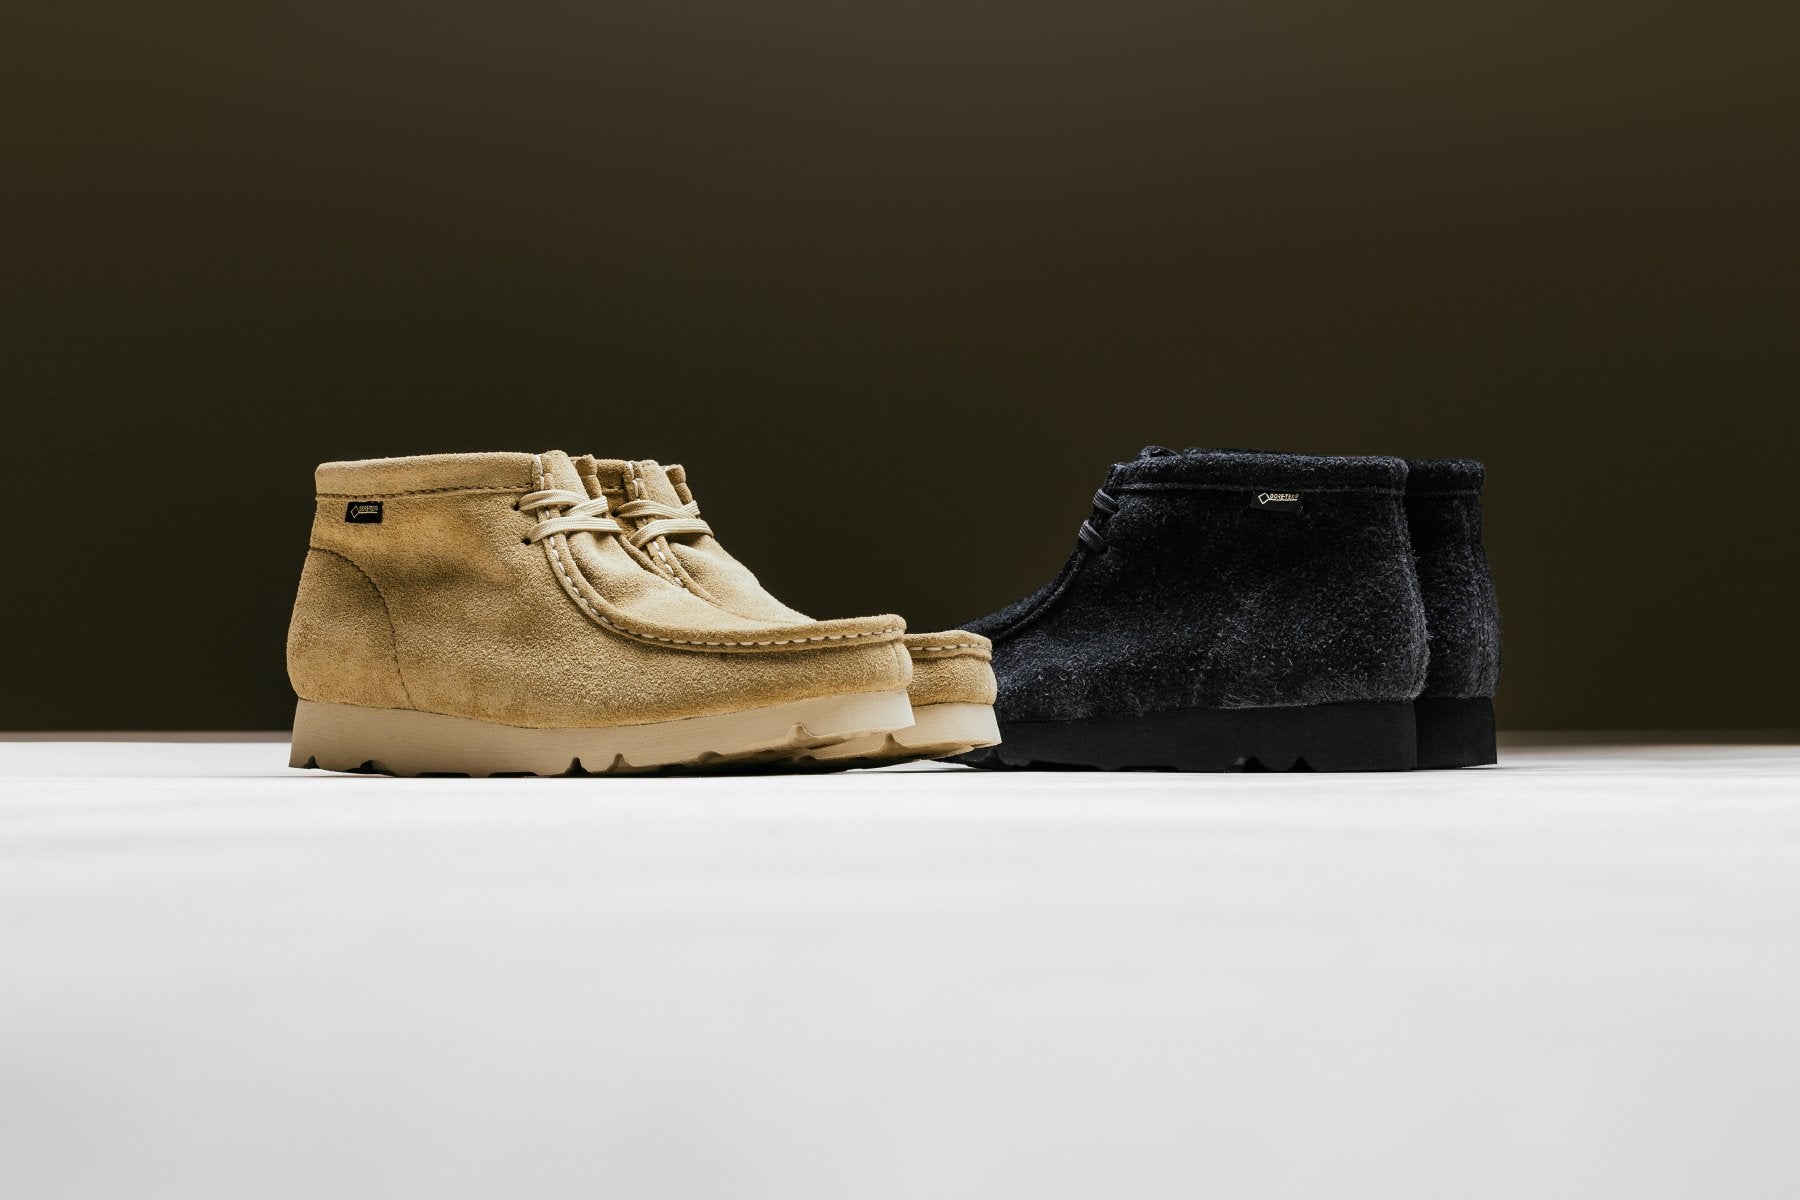 Clarks Beams Wallabee Boot Pack Available Now – Feature